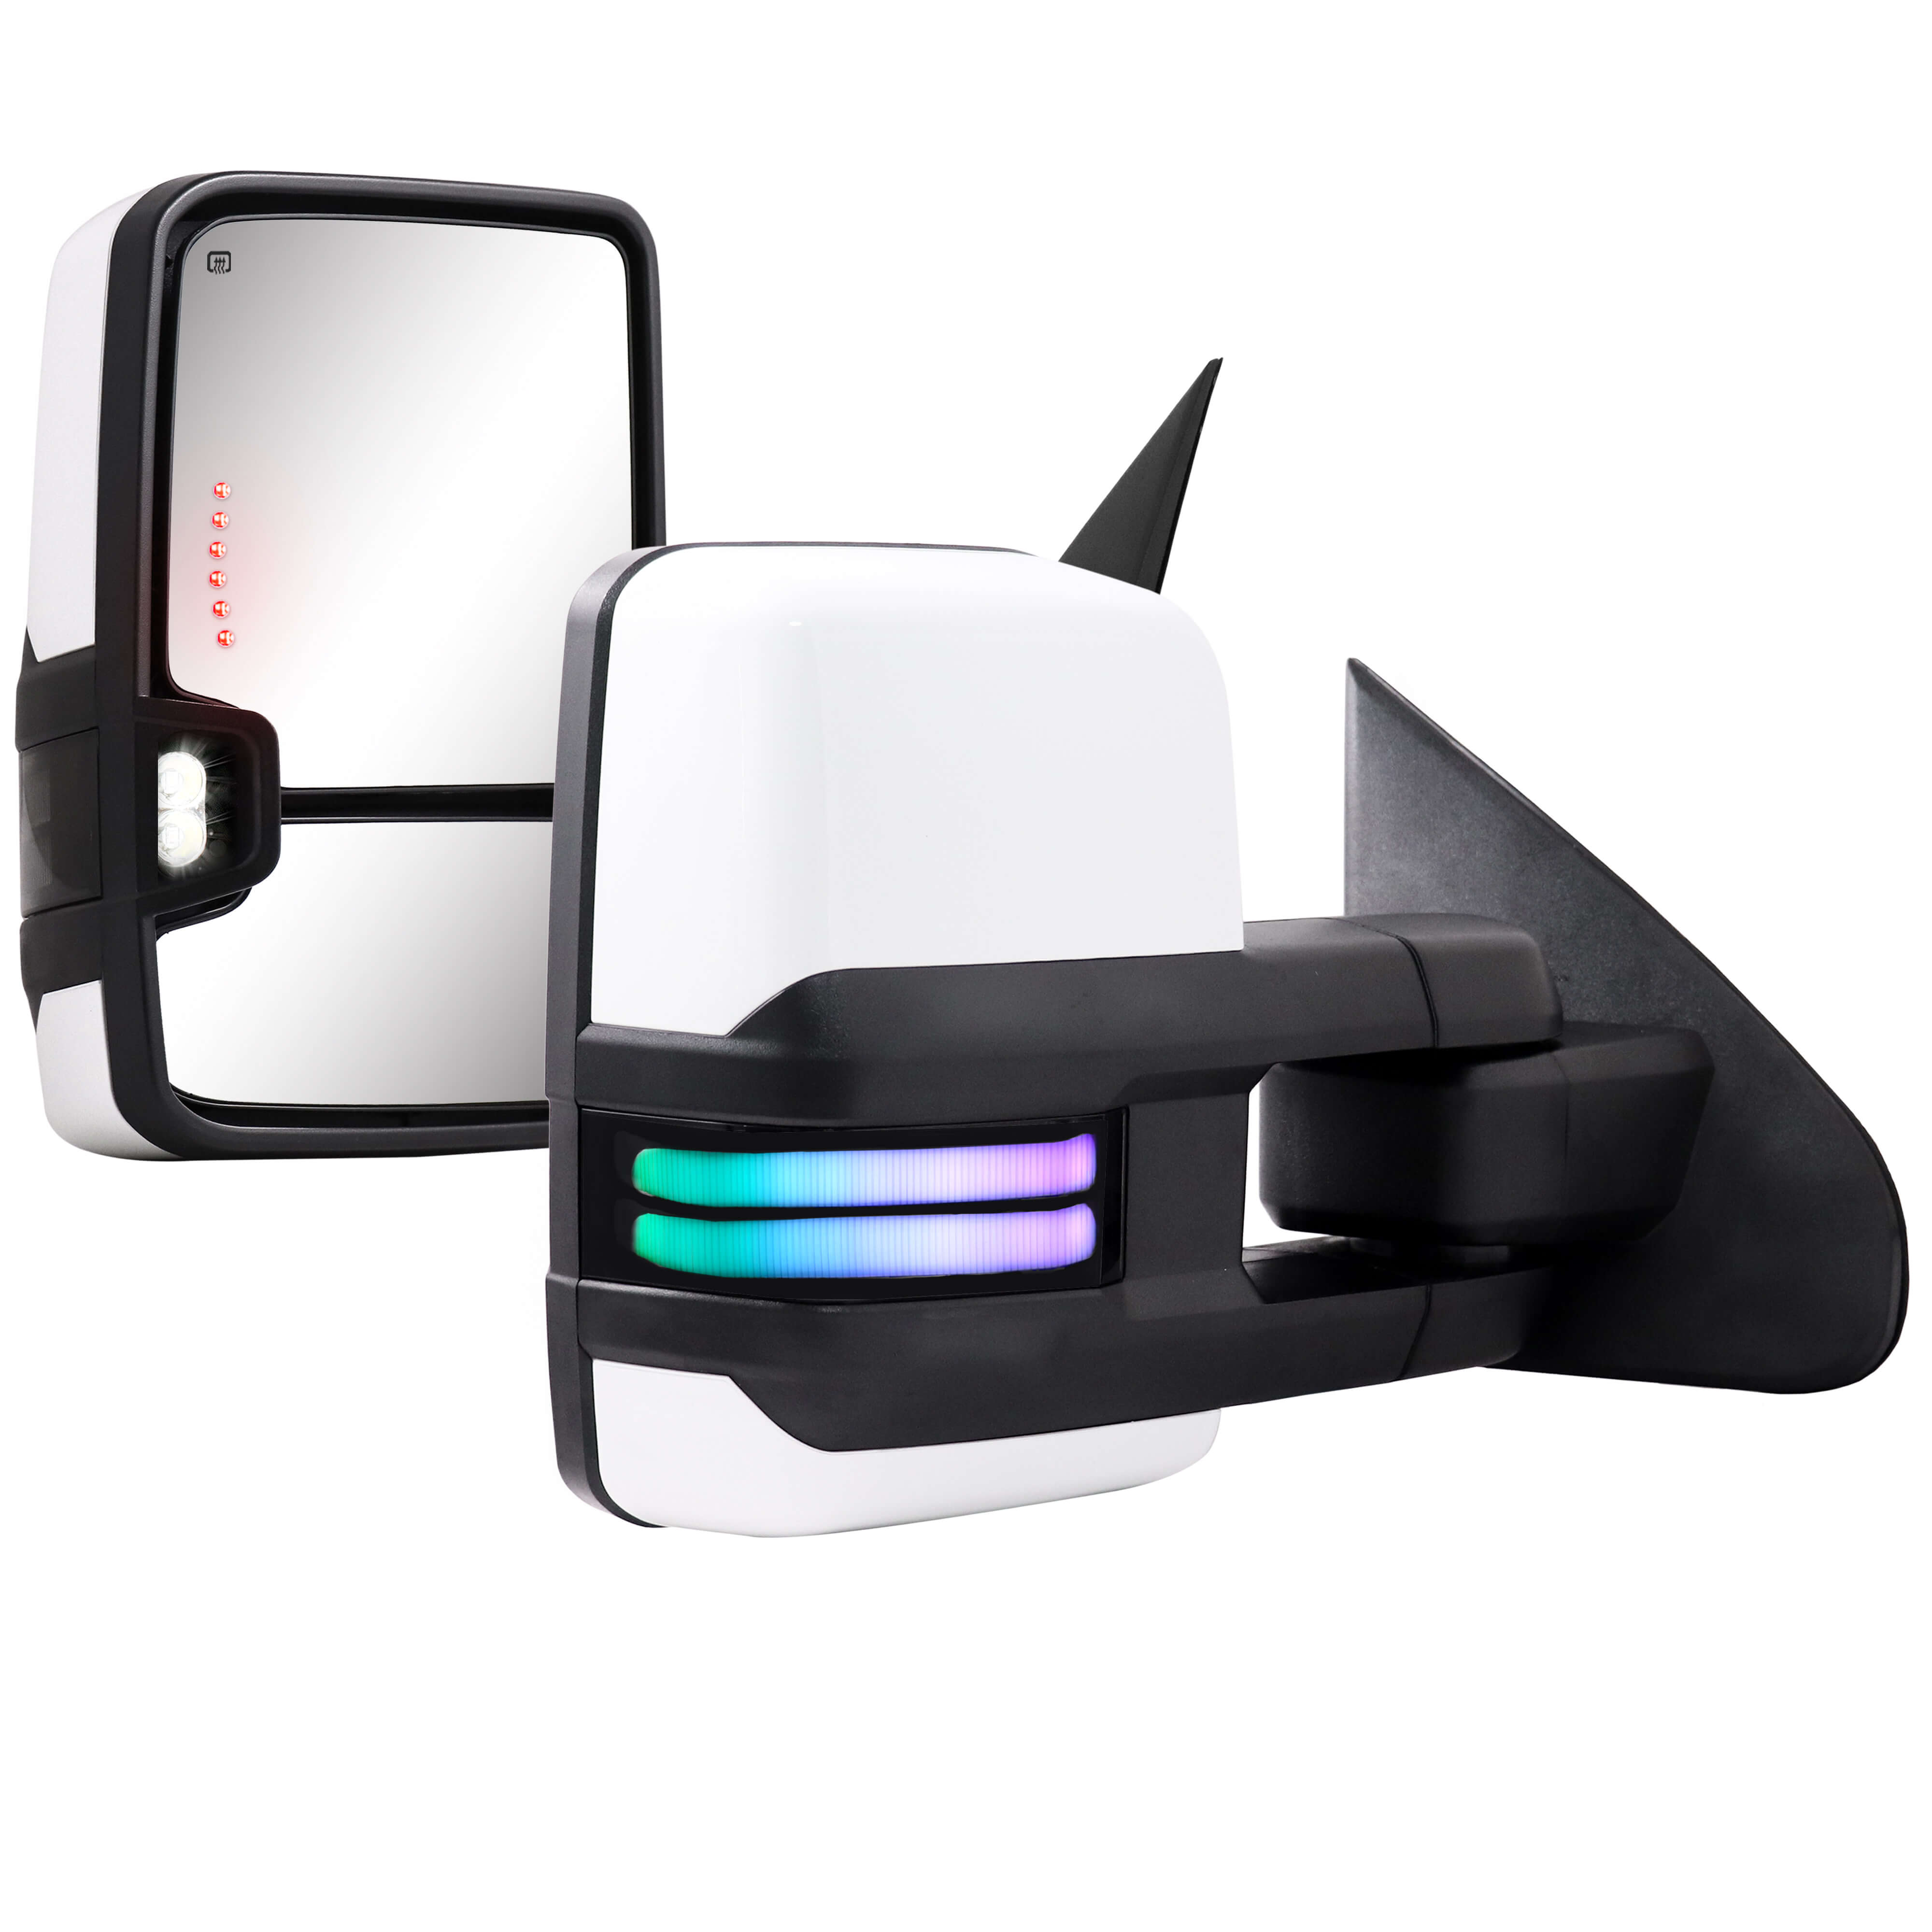 Extendable Telescopic Towing Mirrors for 2014-2019 Chevy Silverado GMC Sierra Multifunction Pair Set